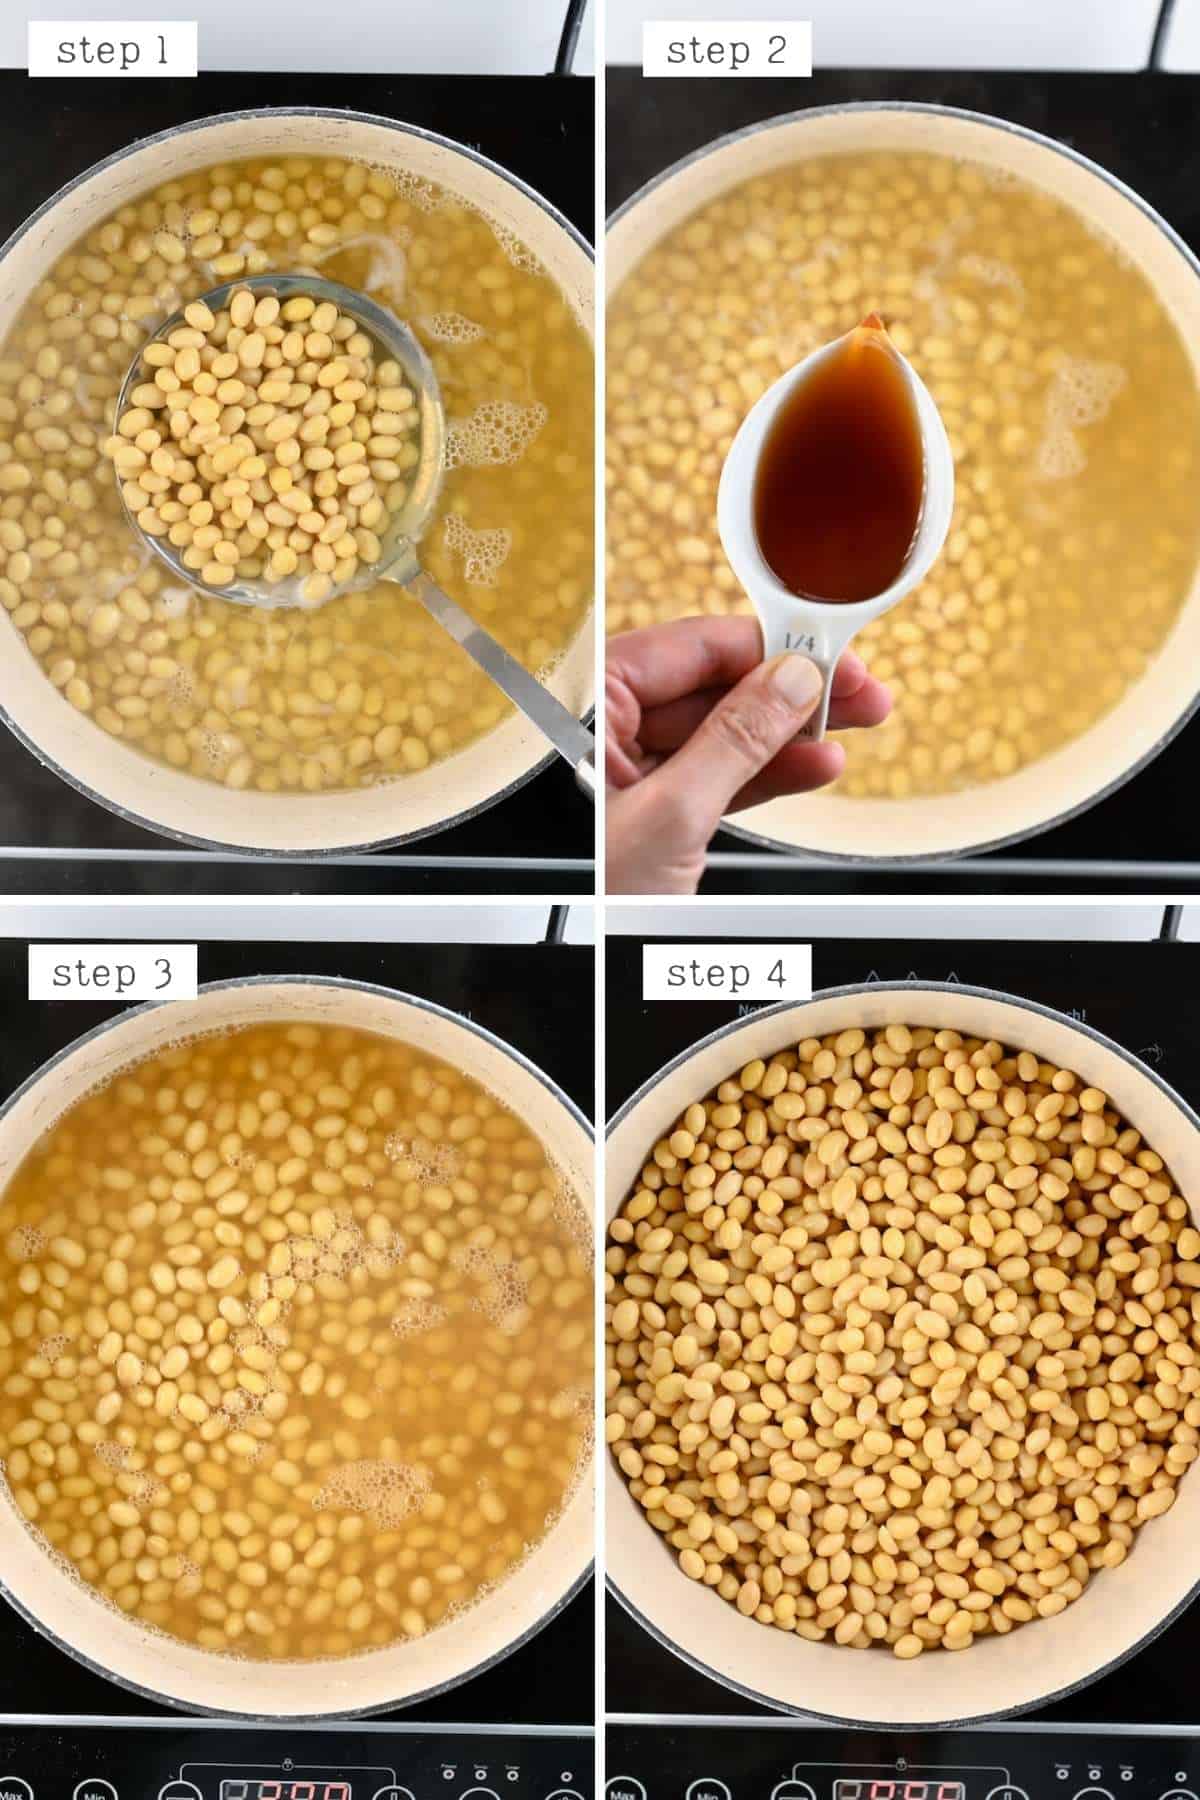 Steps for adding vinegar to boiled soybeans